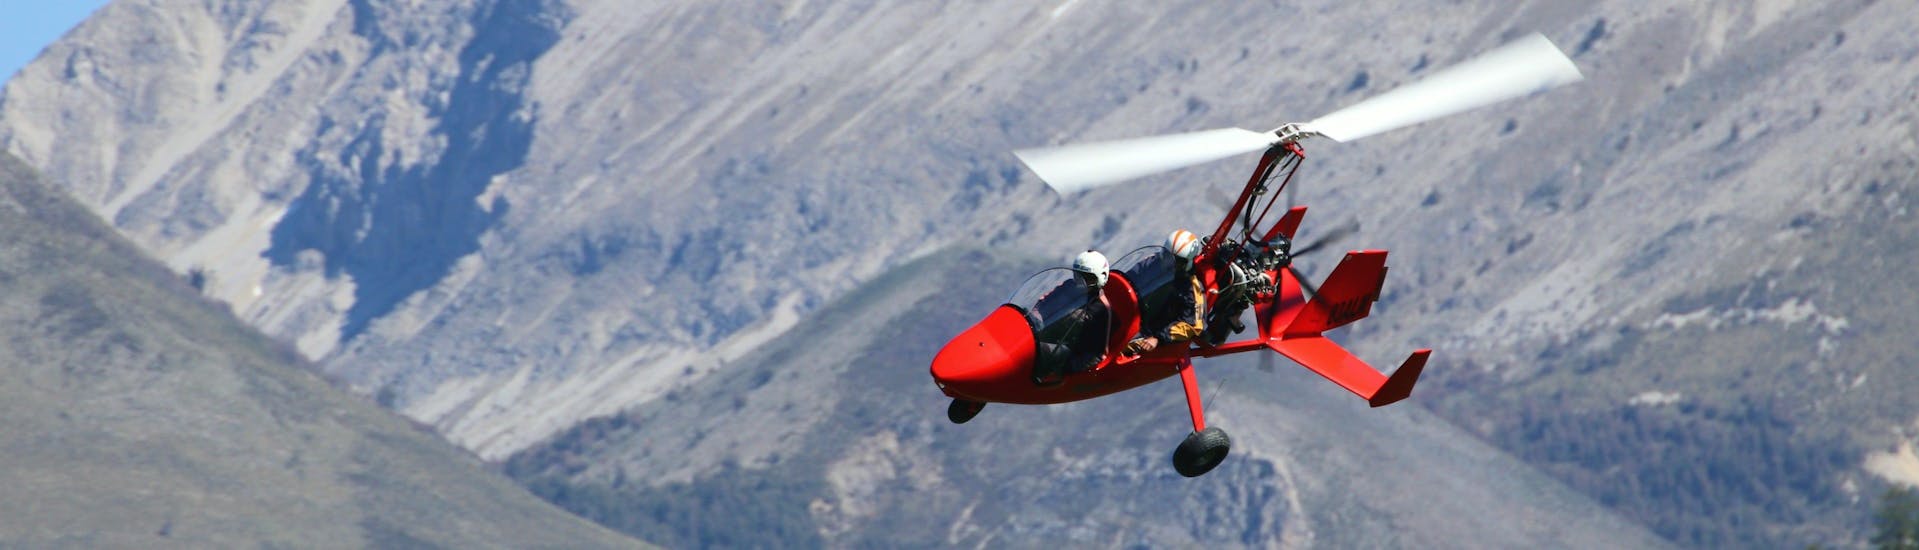 A pilot from Haut les mains is doing a gyroplane discovery flight over Provence with a passenger.